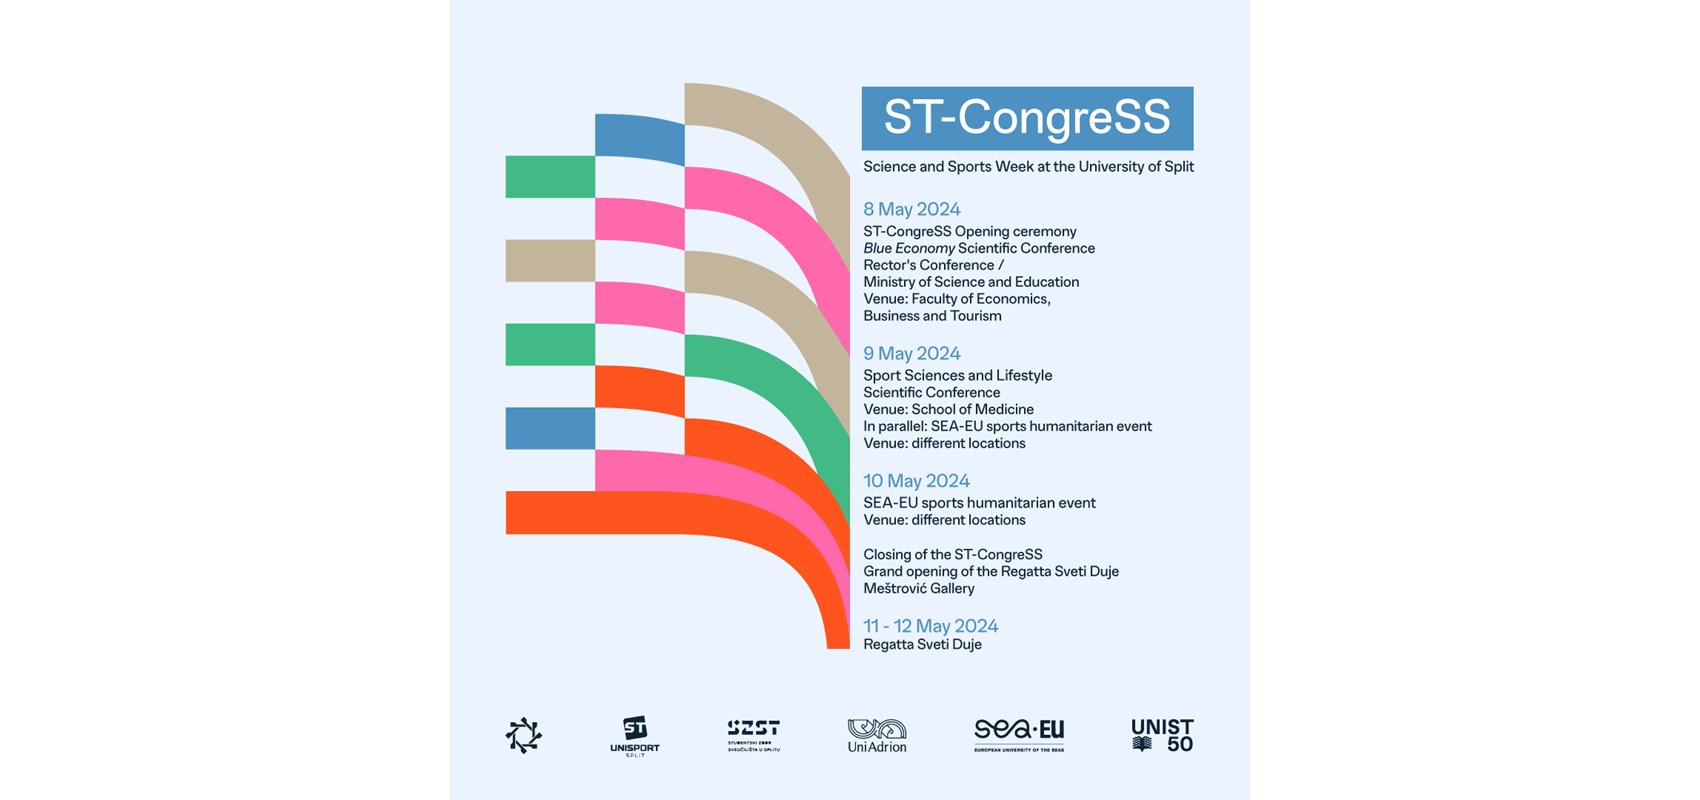 Call for submission of abstracts for ST-CongreSS is prolonged until April 26th!